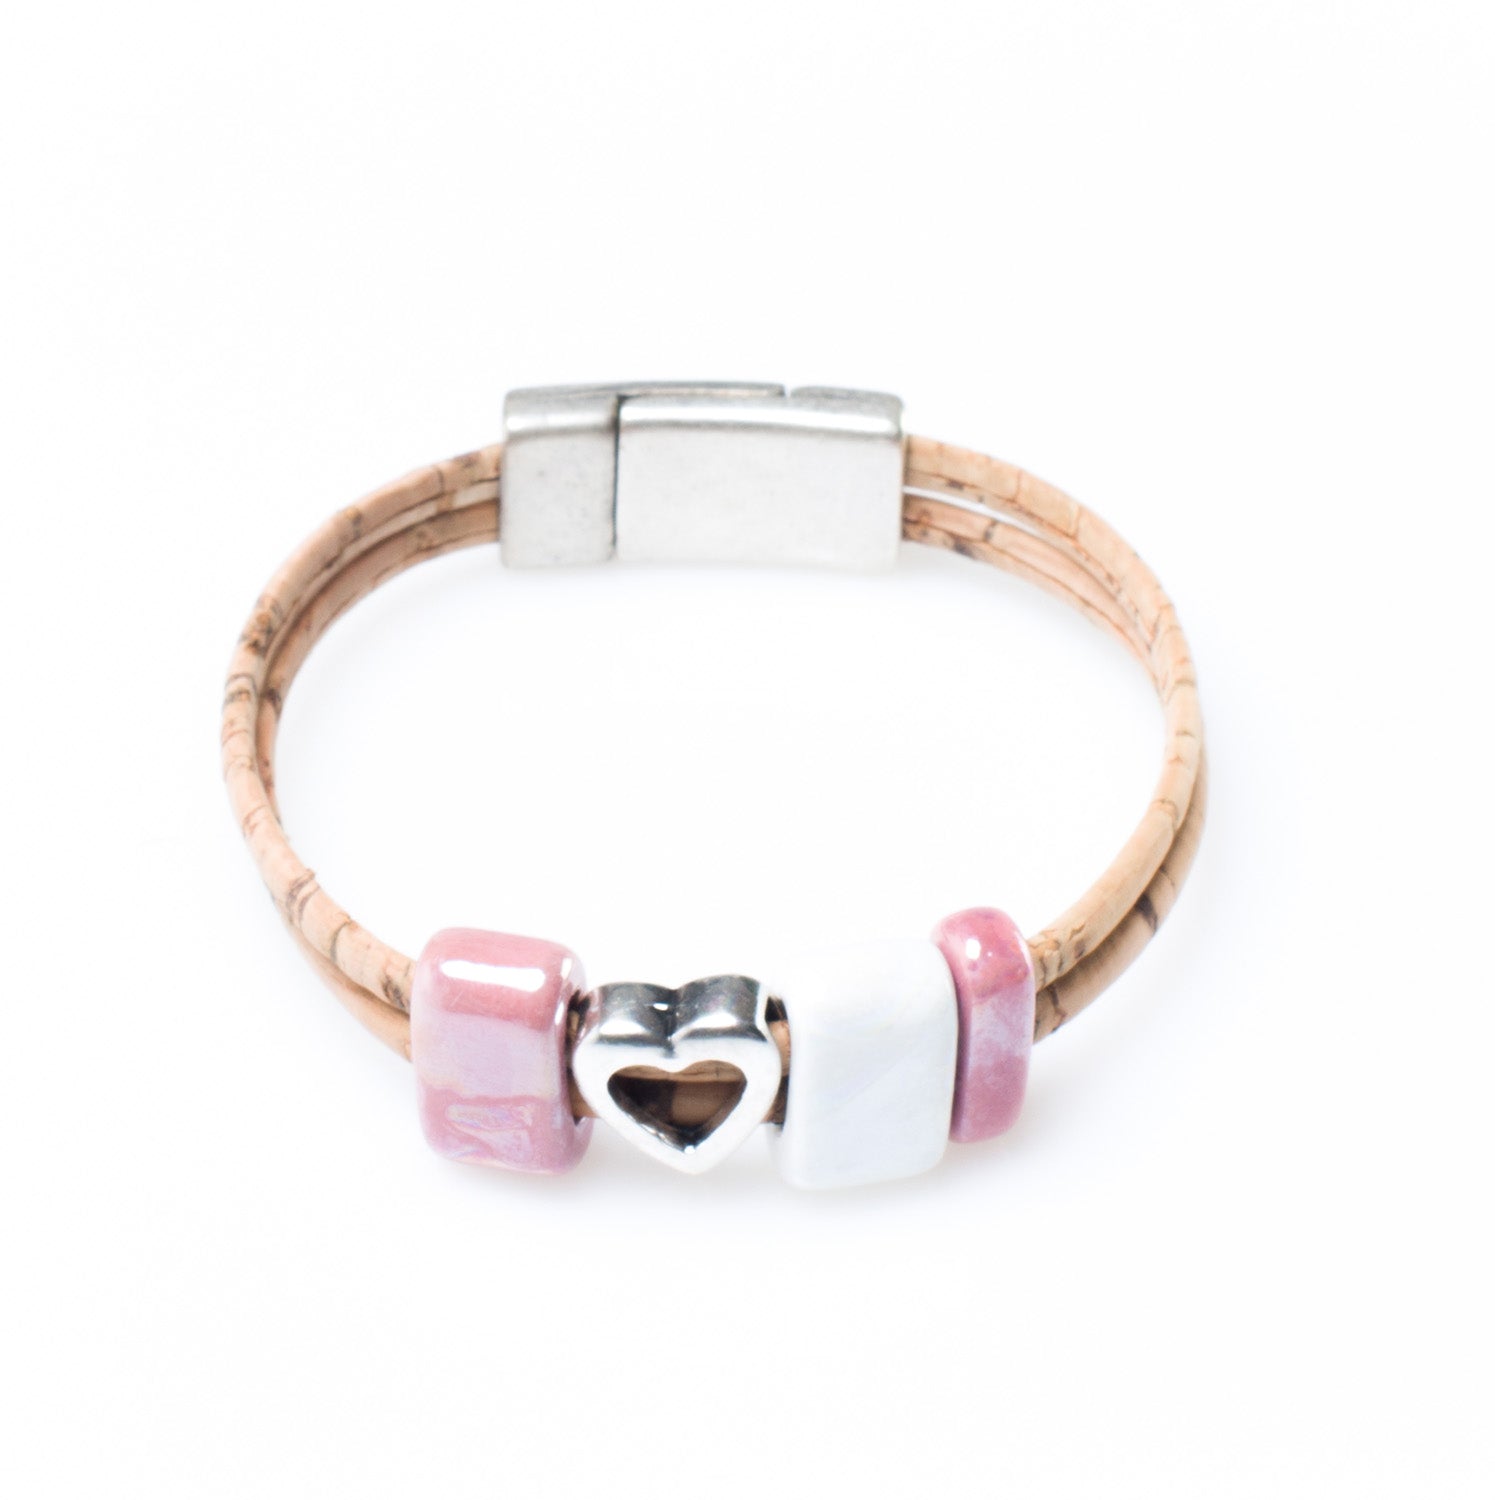 Art for the Cure White and Pink Heart Bracelet | HowCork - The Cork Marketplace